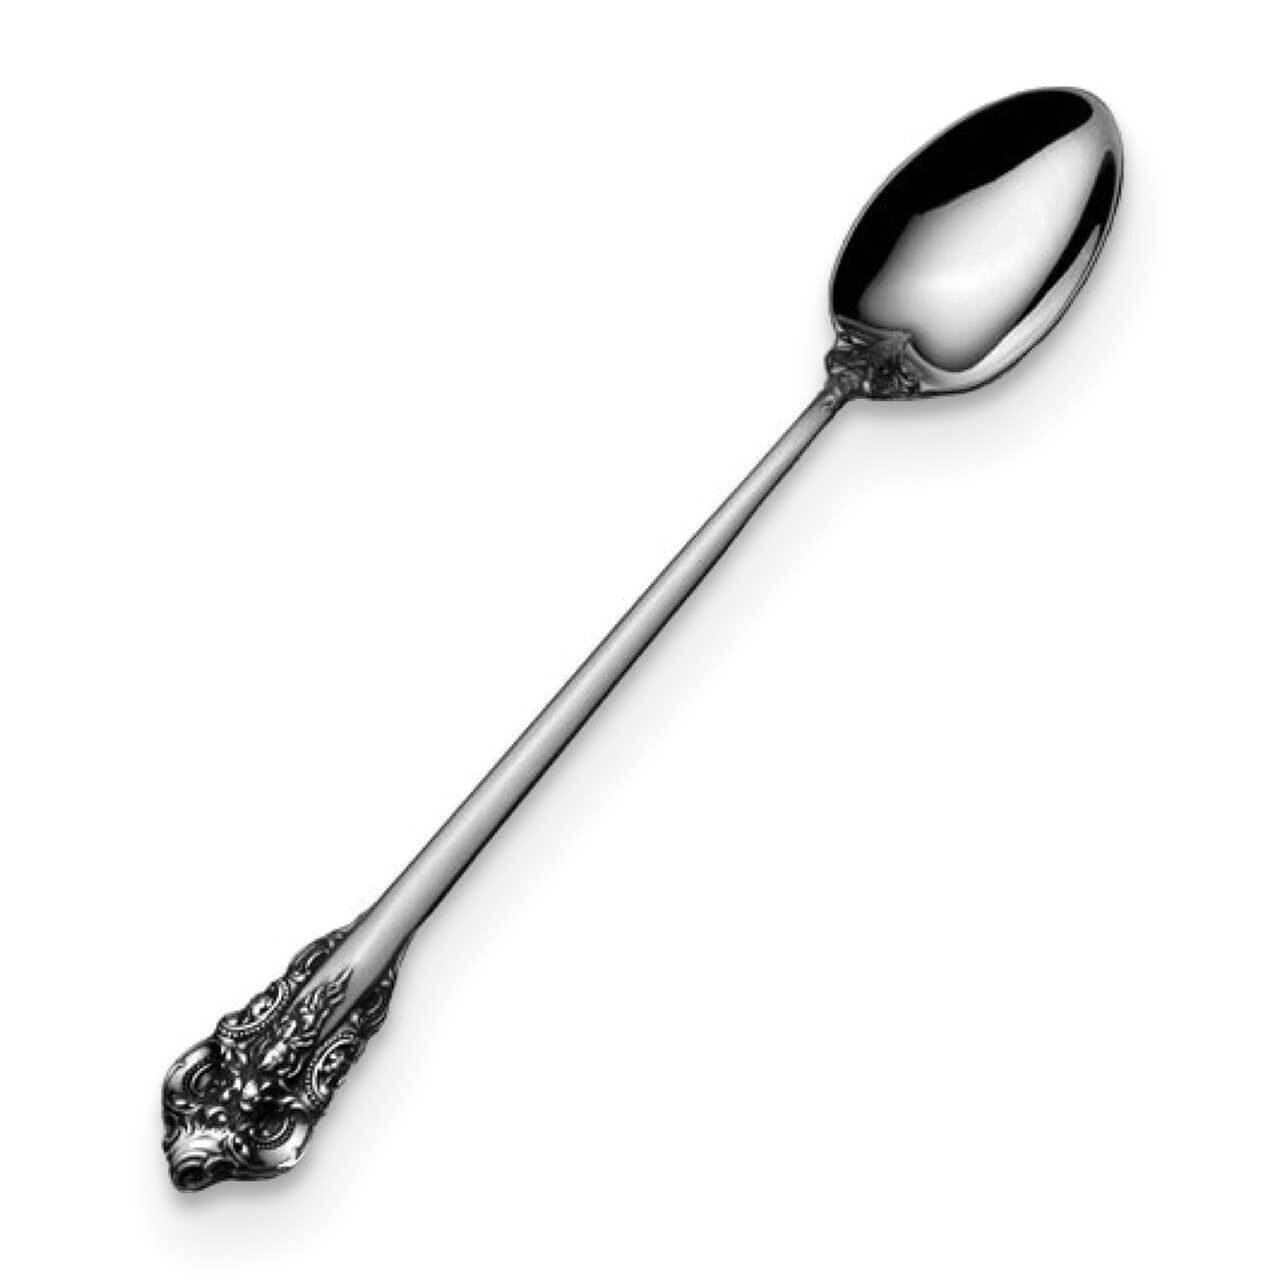 Wallace Grand Baroque Sterling Silver Infant Feeding Spoon GM21981